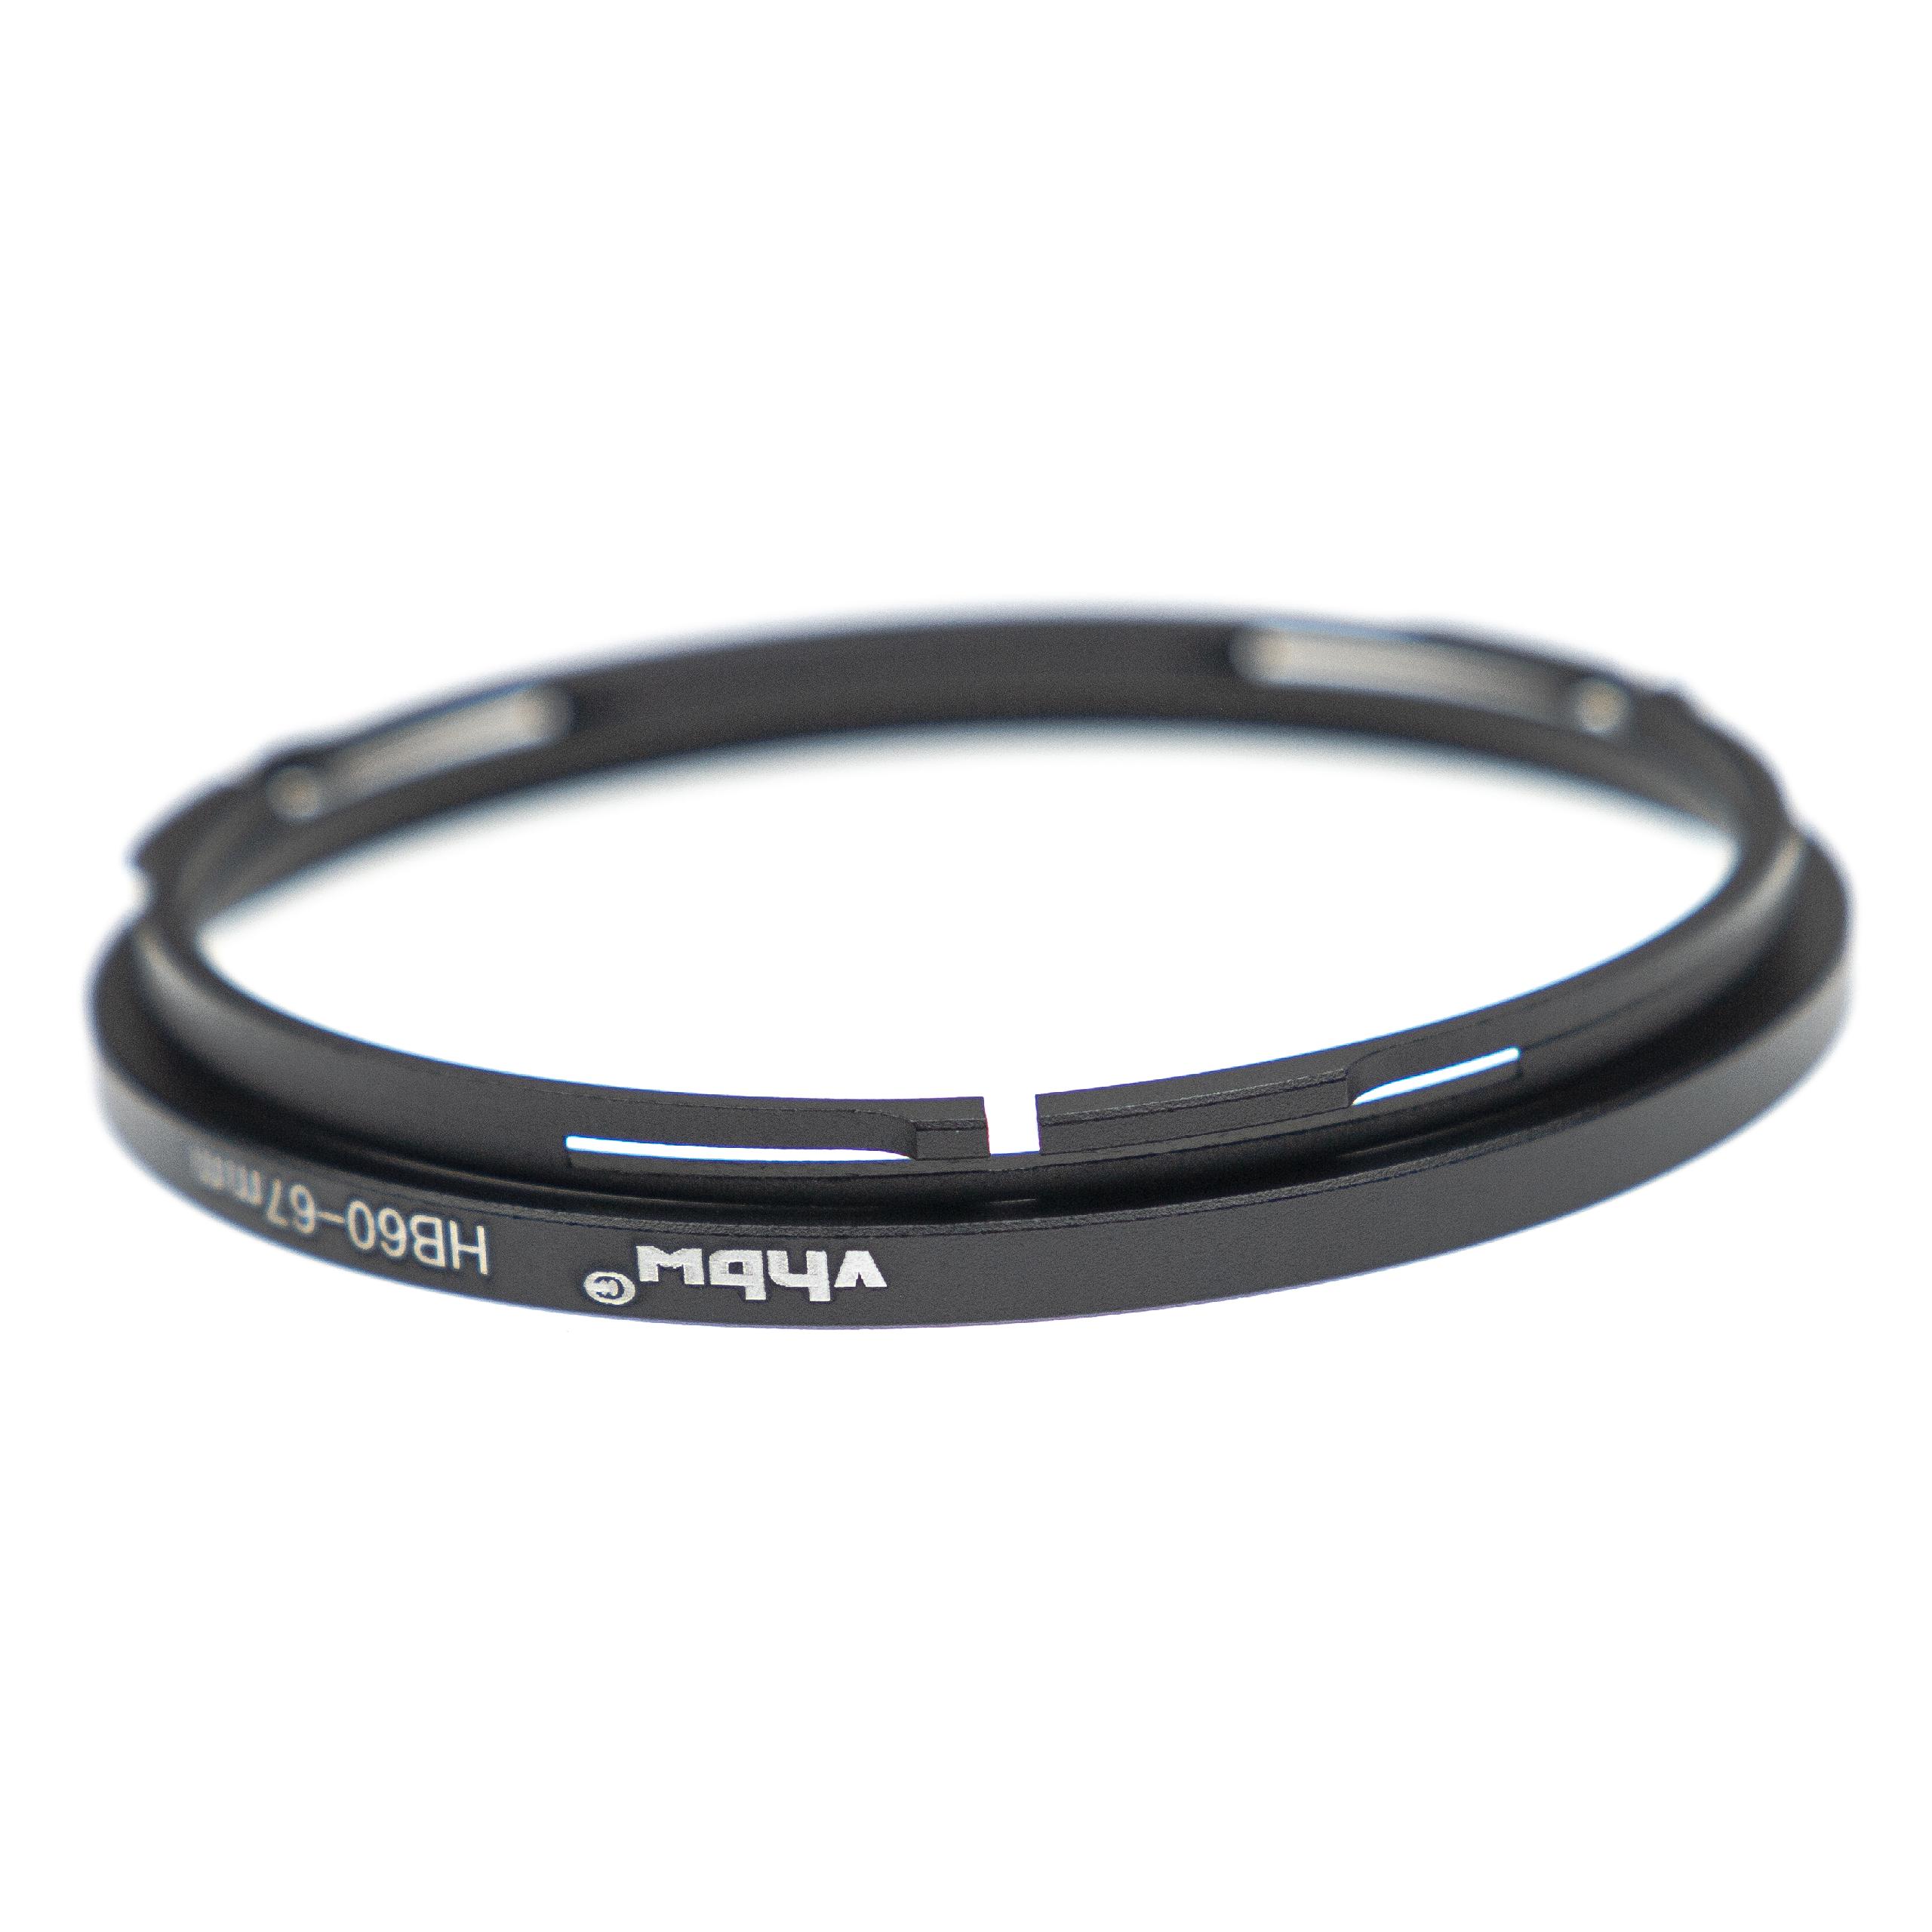 67 mm Filter Adapter suitable for Hasselblad B60 bayonet Camera Lens